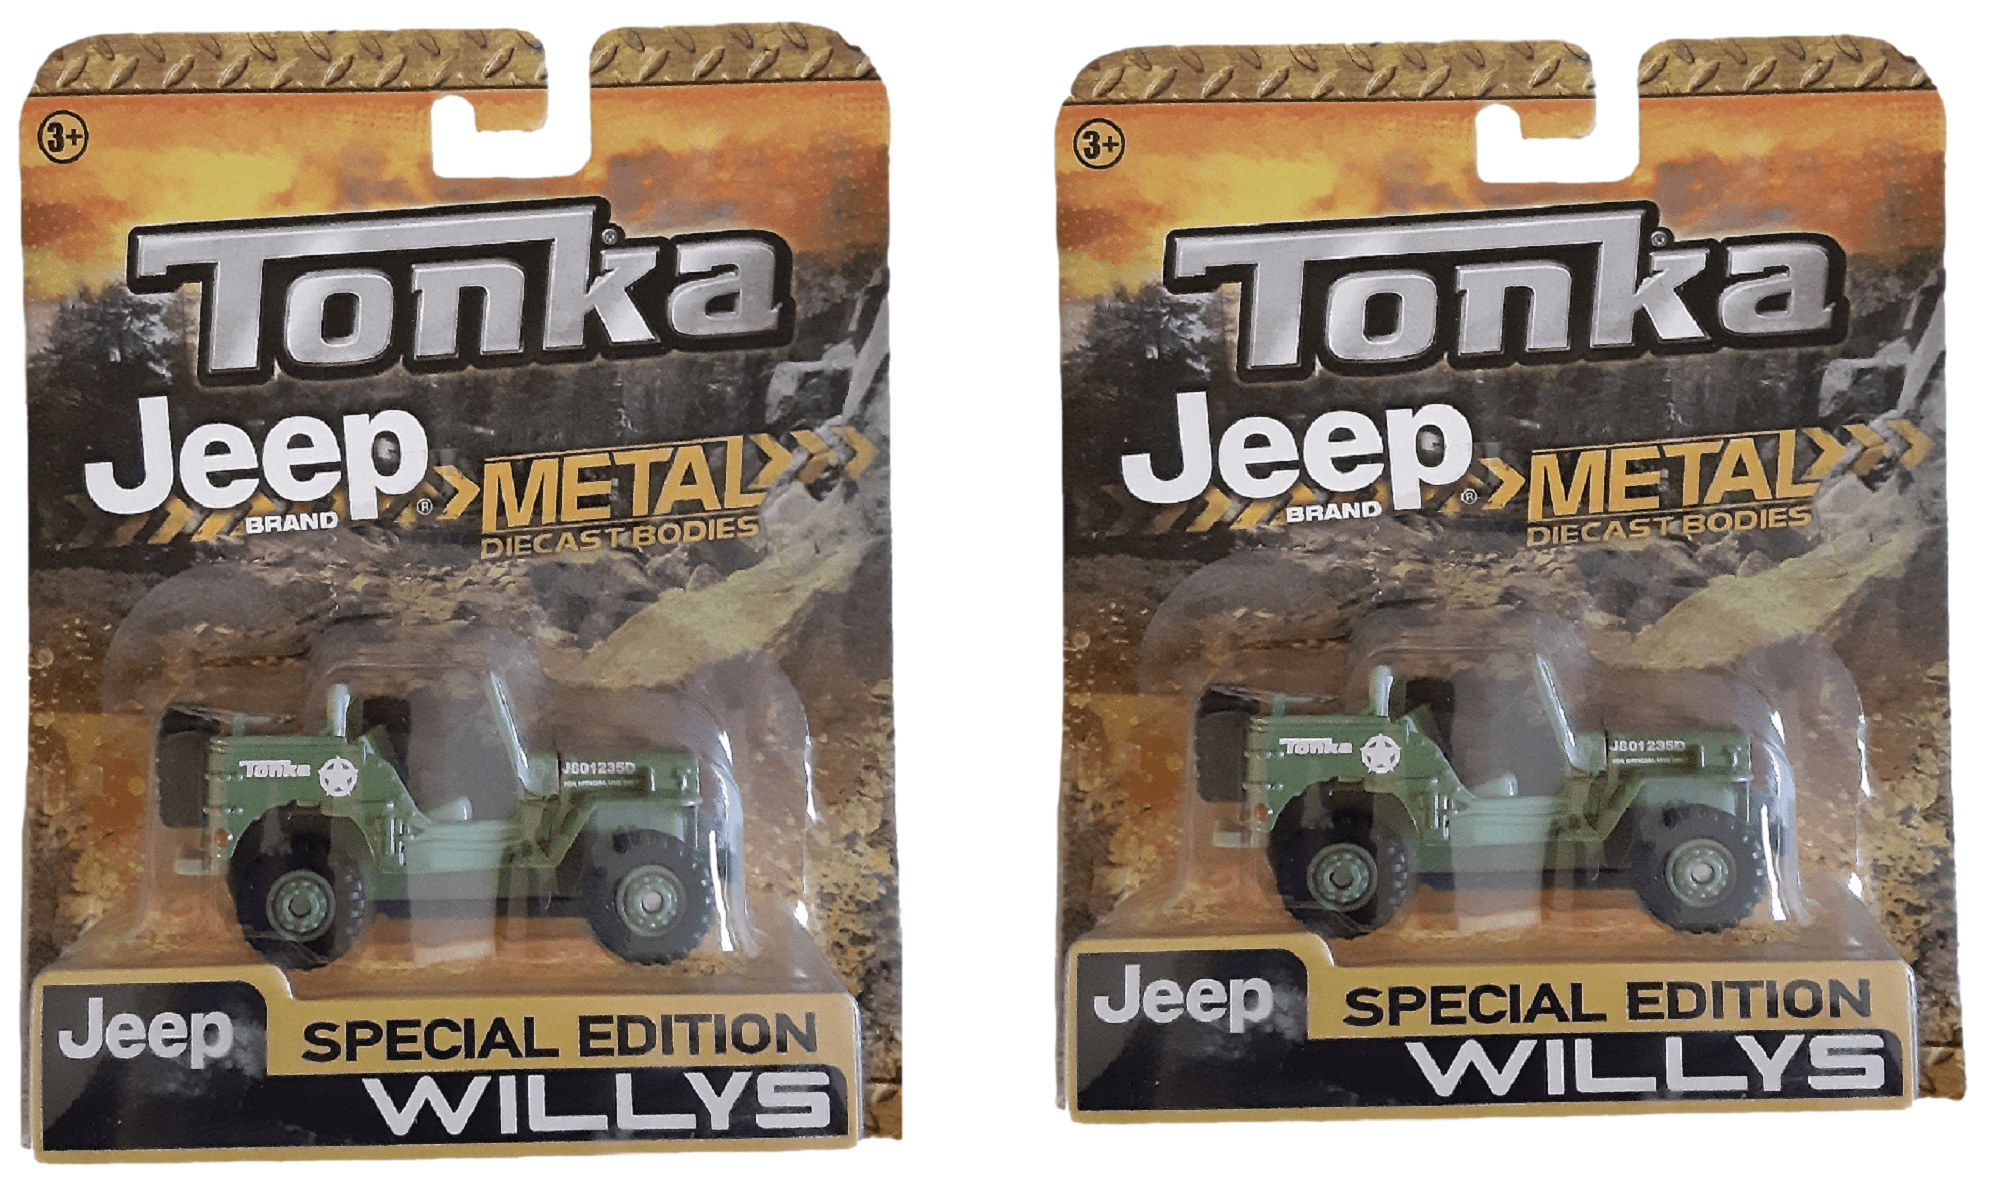 vintage tonka mini or little jeep army green inner body for parts 